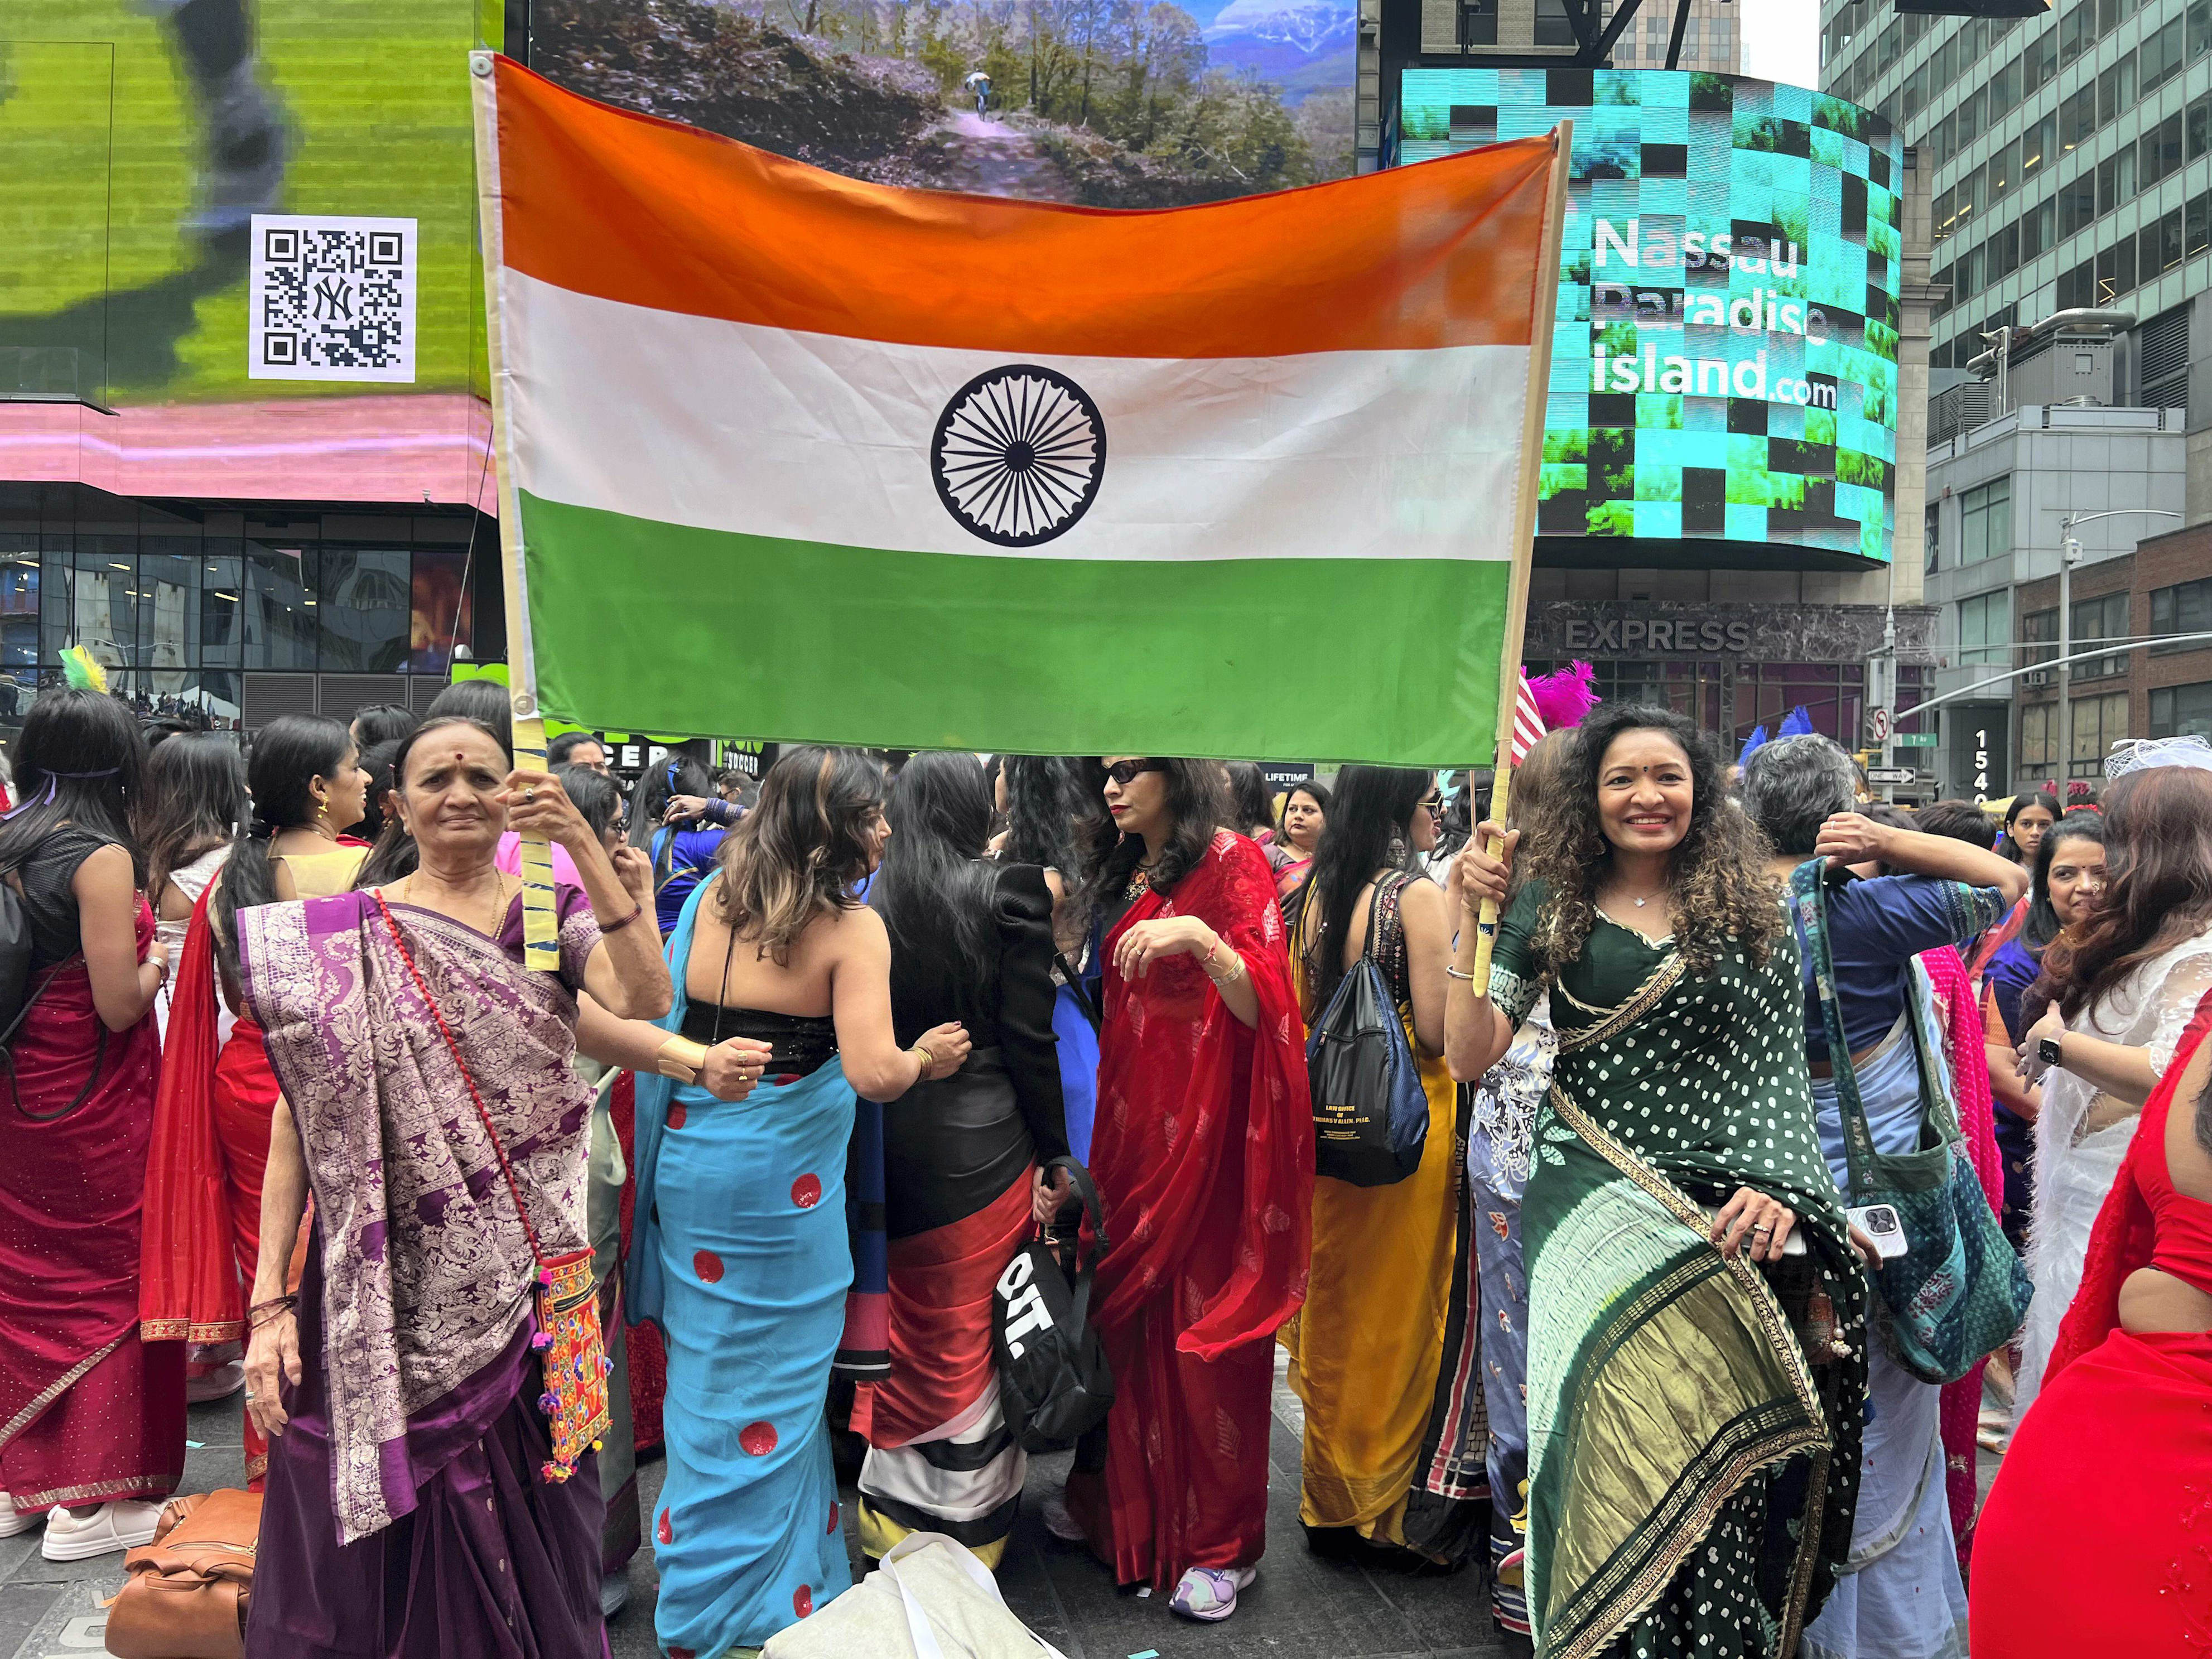 saree's tradition, elegance celebrated in heart of nyc's times square at special global event